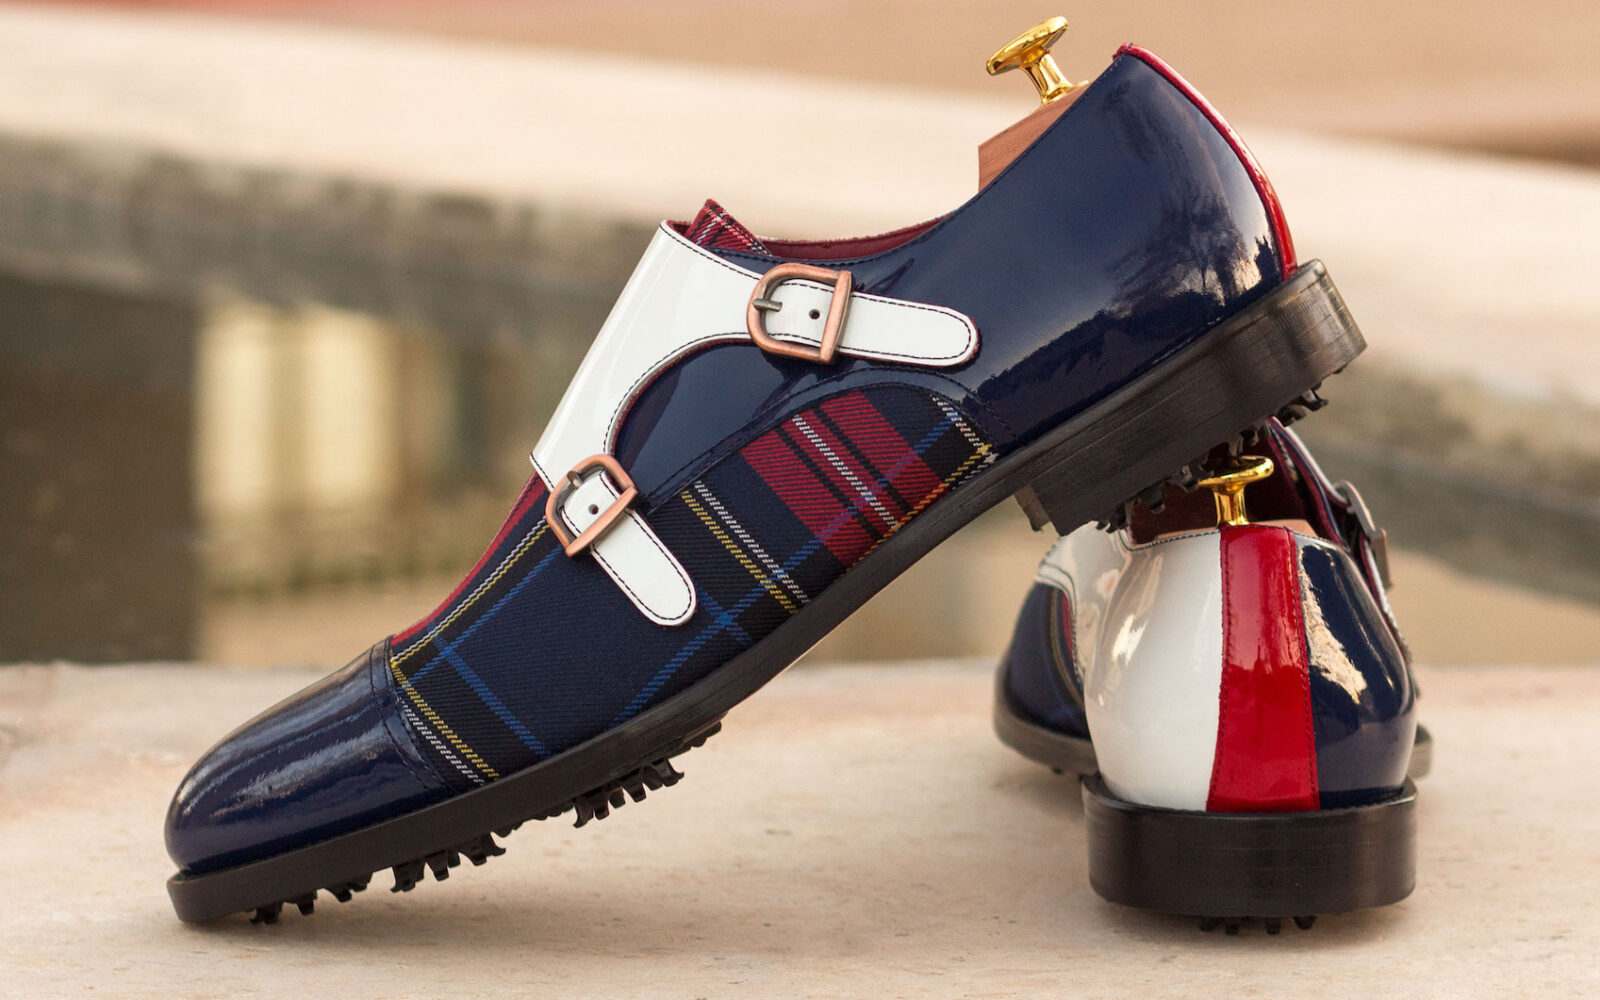 King’s Launches Bespoke Handcrafted Men’s Golf Shoes - MOJEH MEN